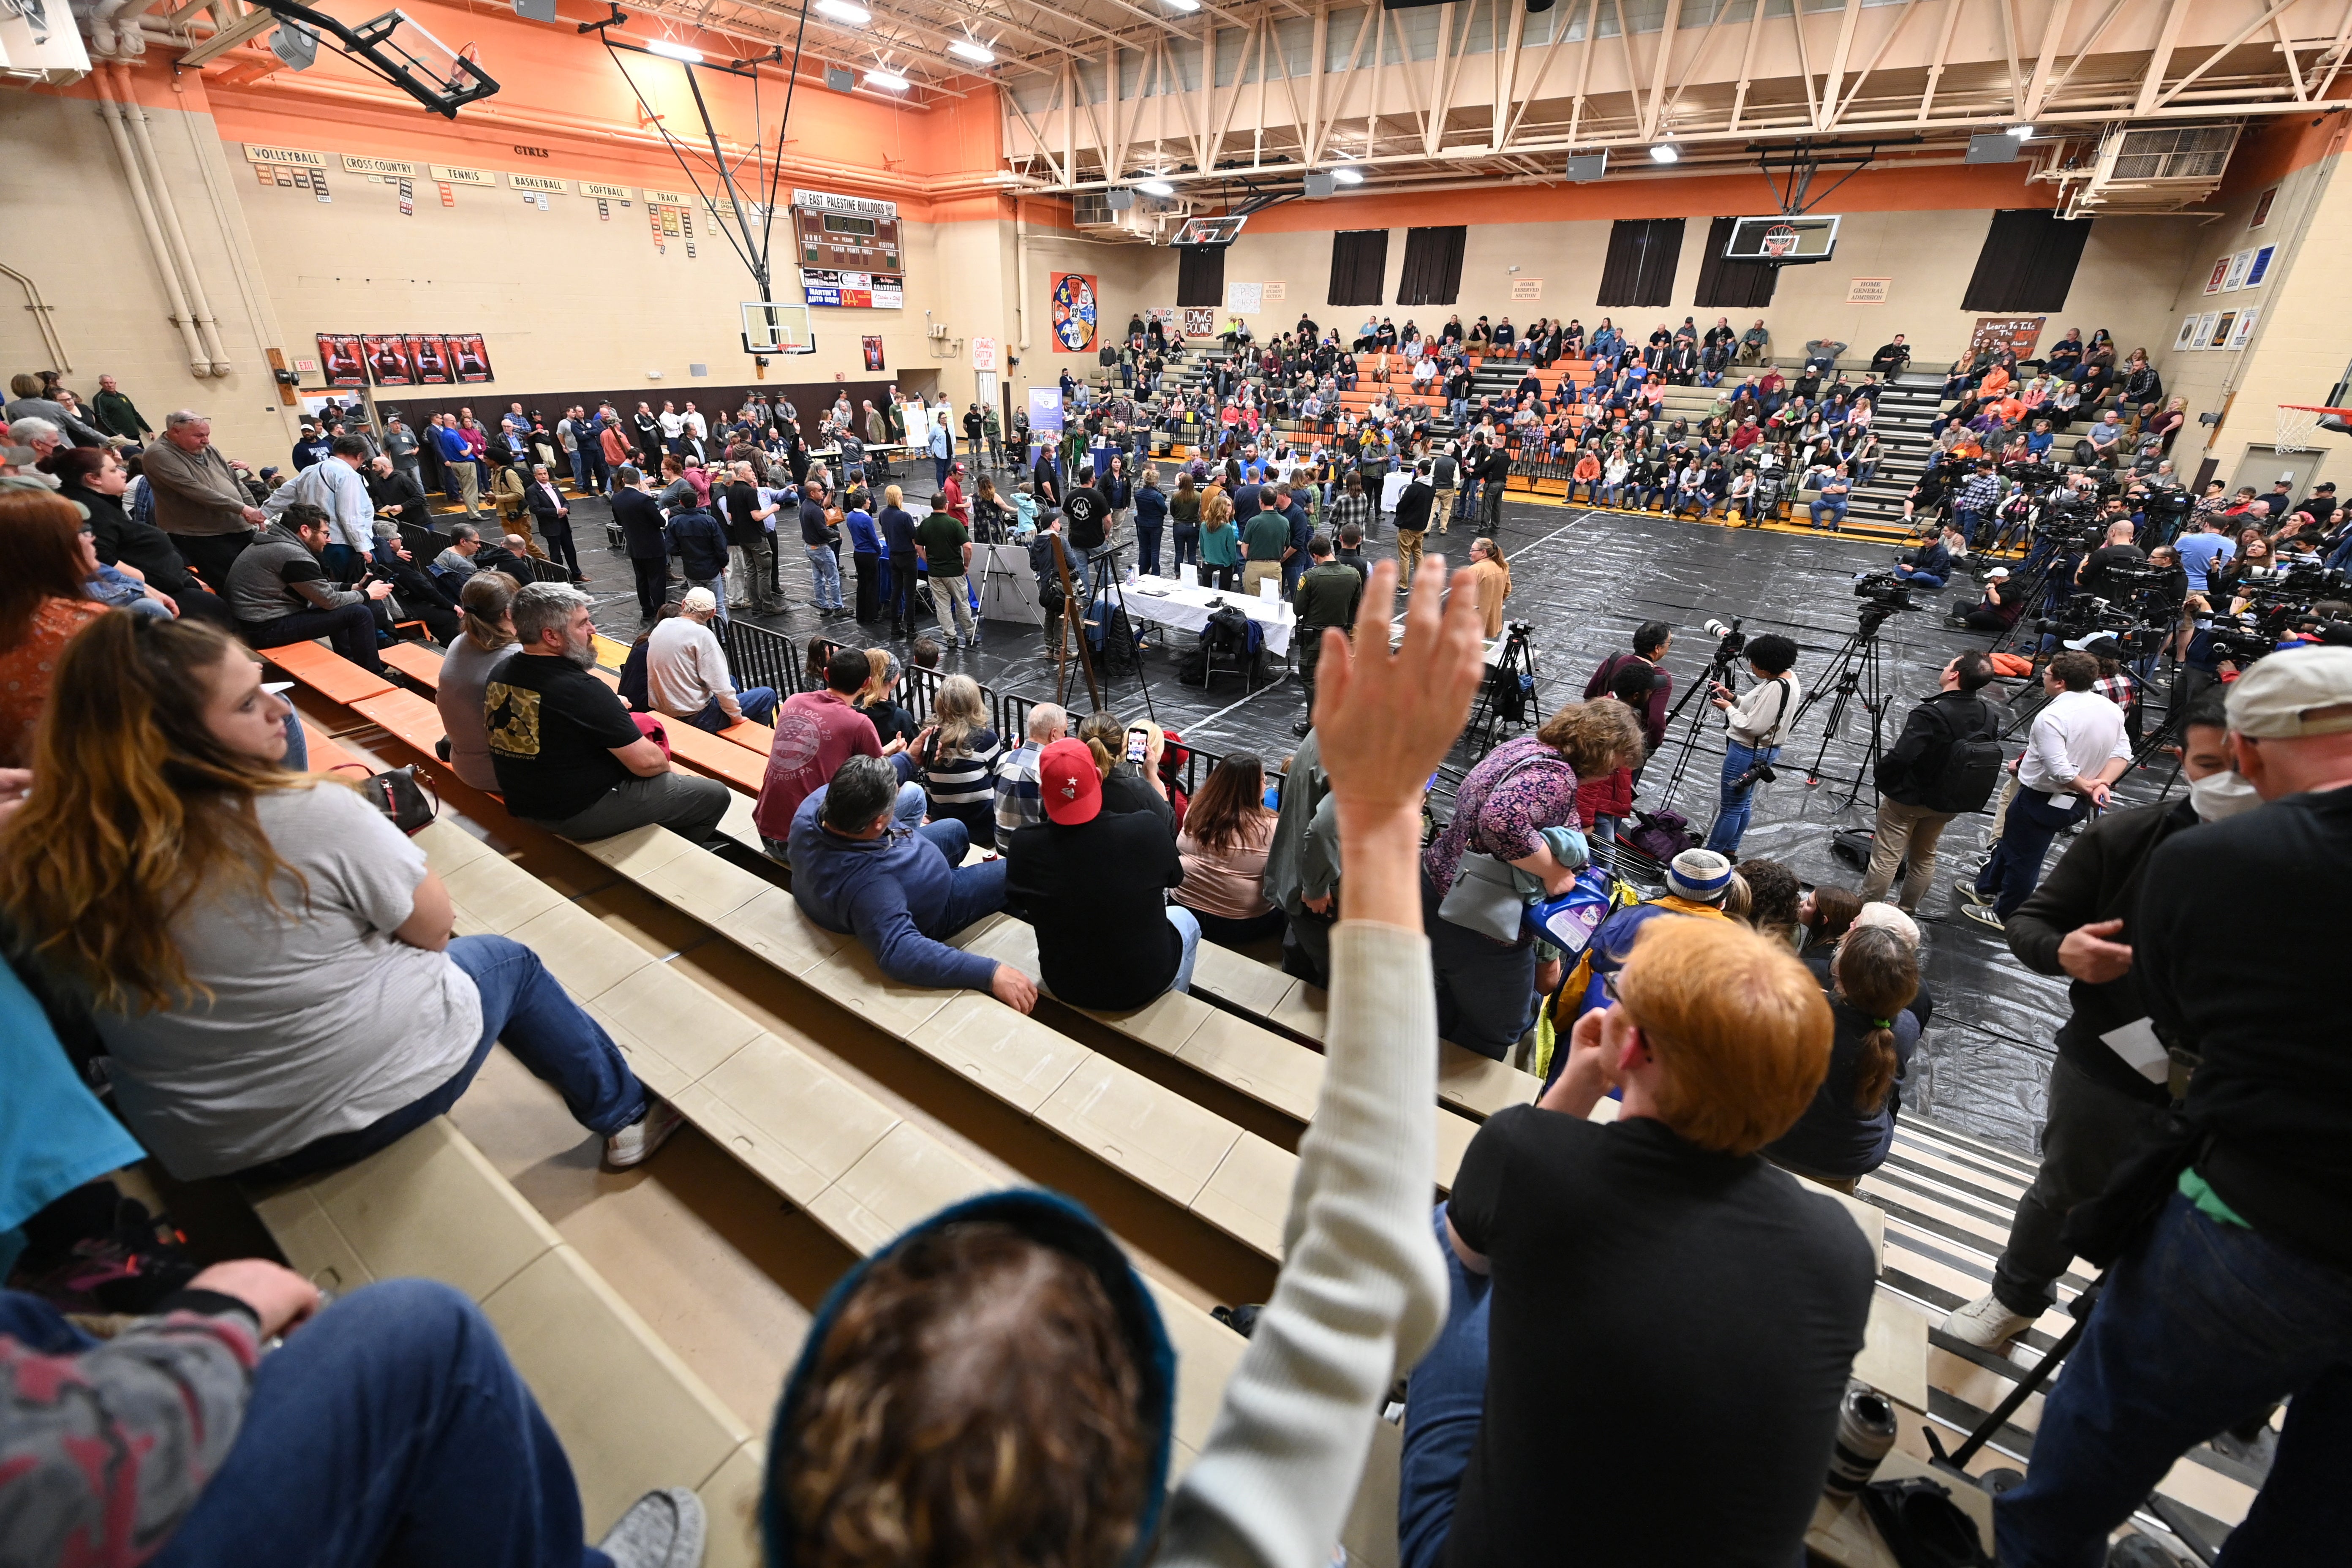 Members of the community gather to discuss their safety and other environmental concerns at a town hall meeting following a train derailment that spilled toxic chemicals, in East Palestine